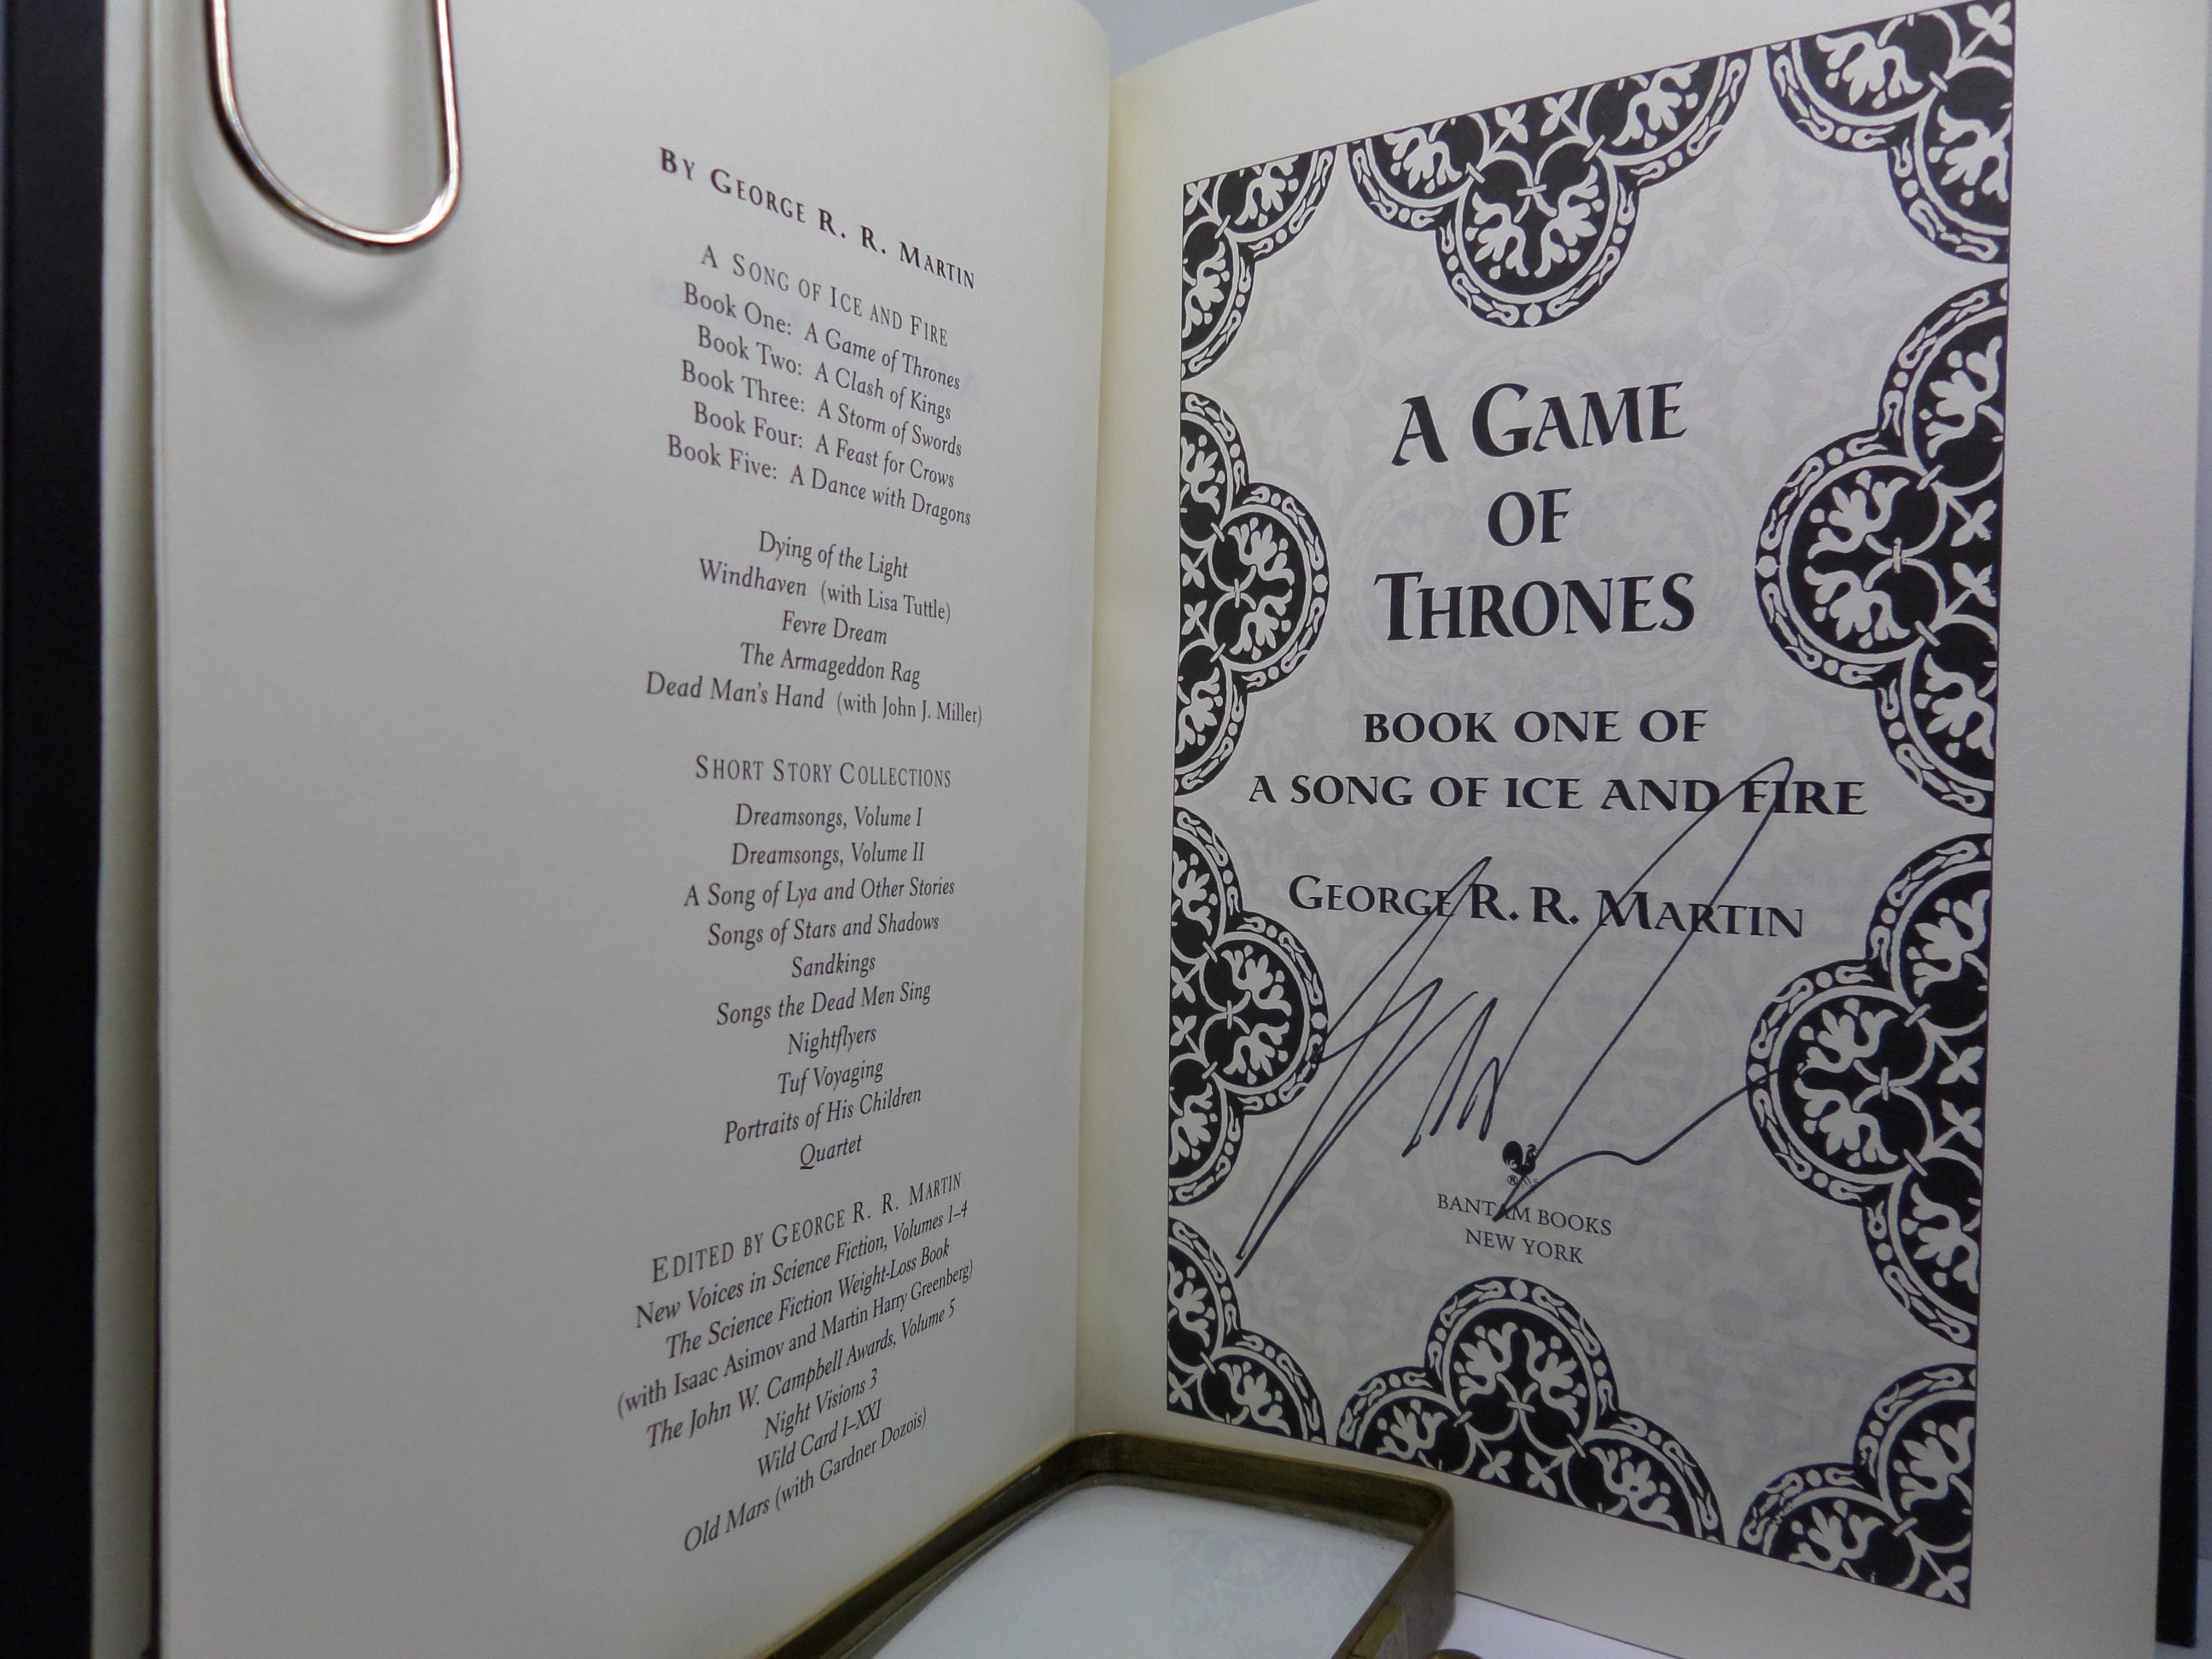 GAME OF THRONES: BOOK ONE OF A SONG OF ICE & FIRE 1996 GEORGE R.R. MARTIN SIGNED